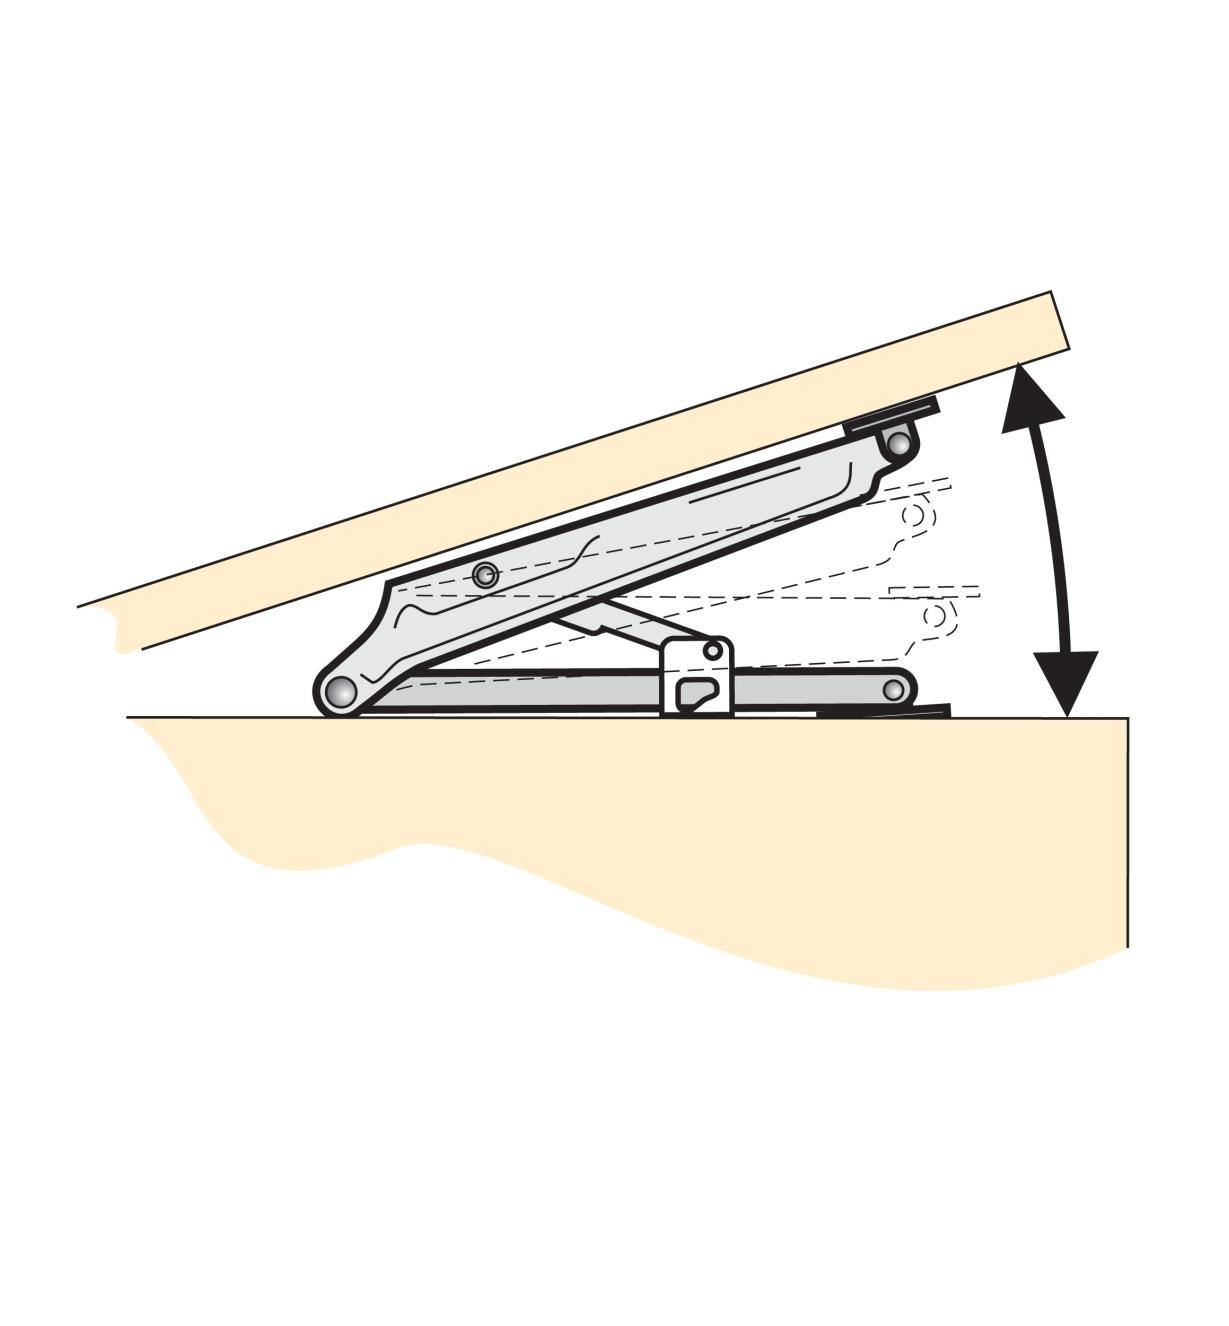 Illustration showing how a ratchet support lifts and lowers a surface